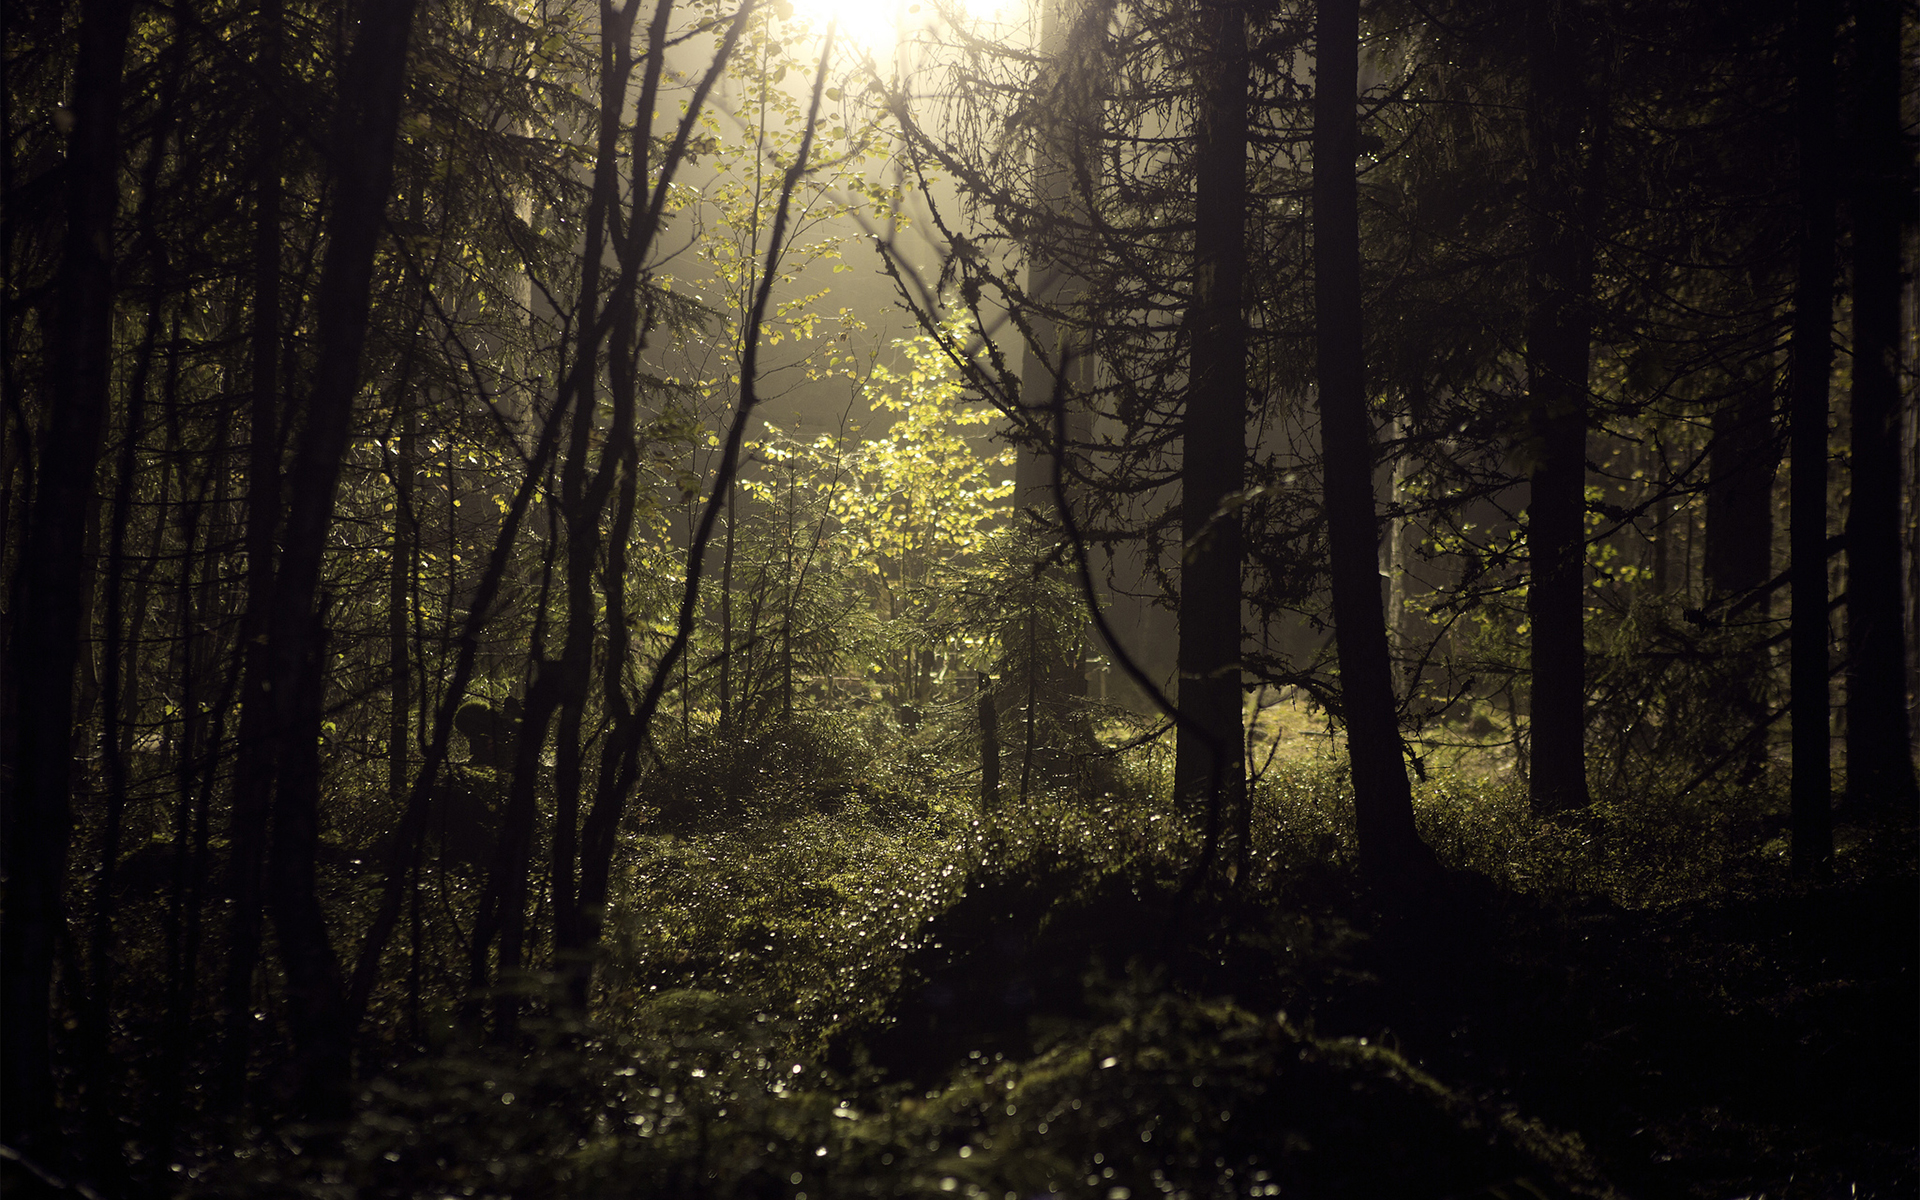 Weekly Wallpaper: Take A Walk Through The Forest